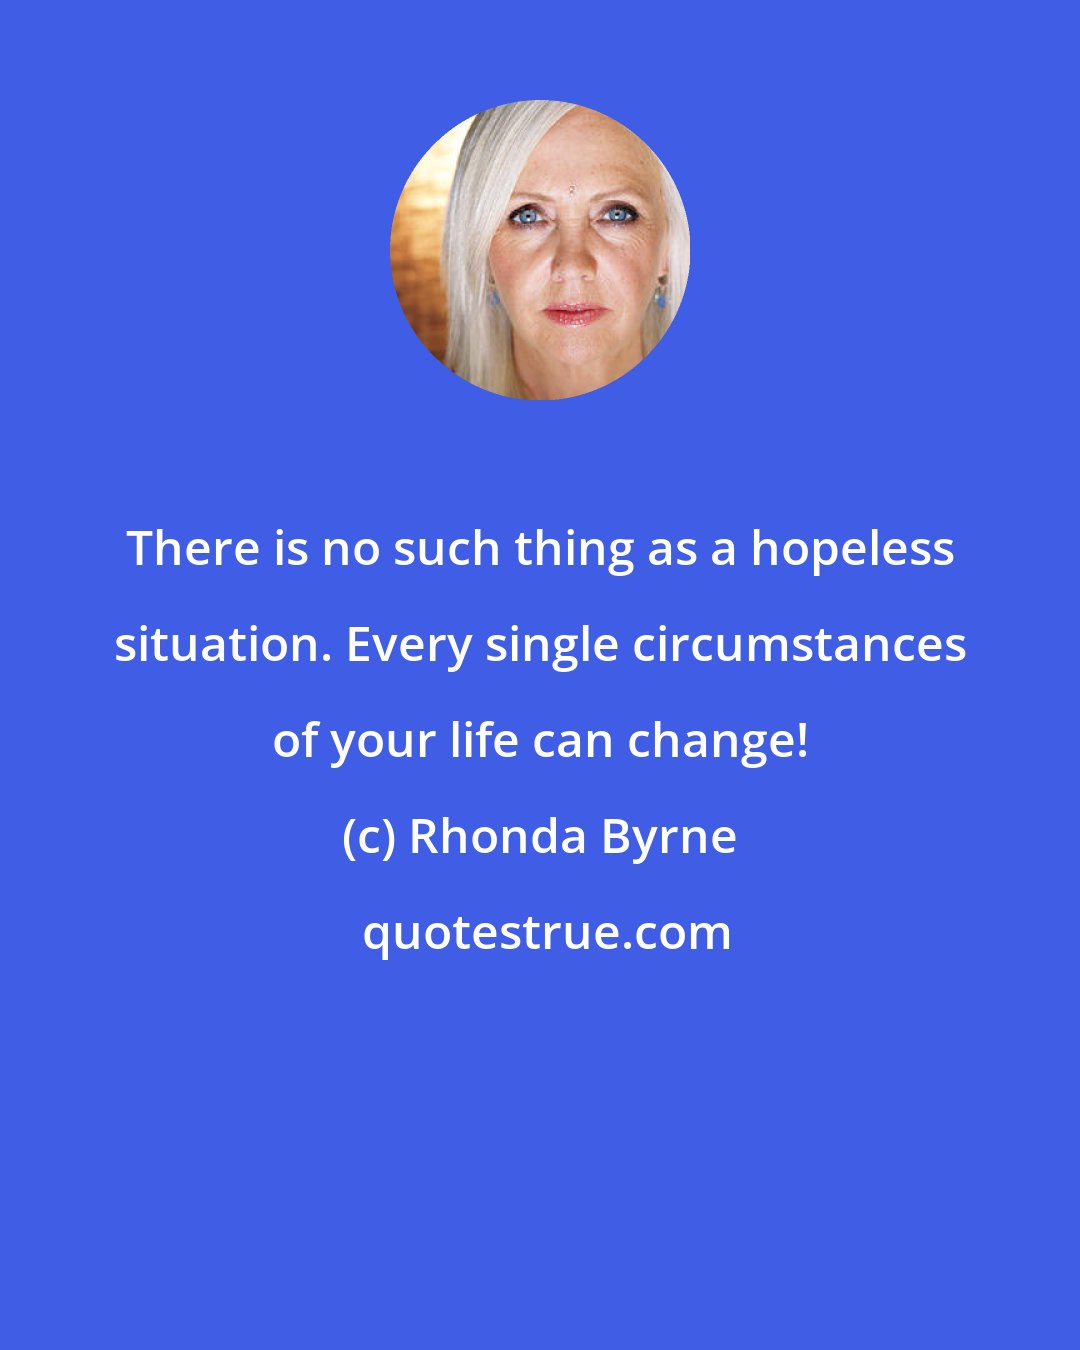 Rhonda Byrne: There is no such thing as a hopeless situation. Every single circumstances of your life can change!